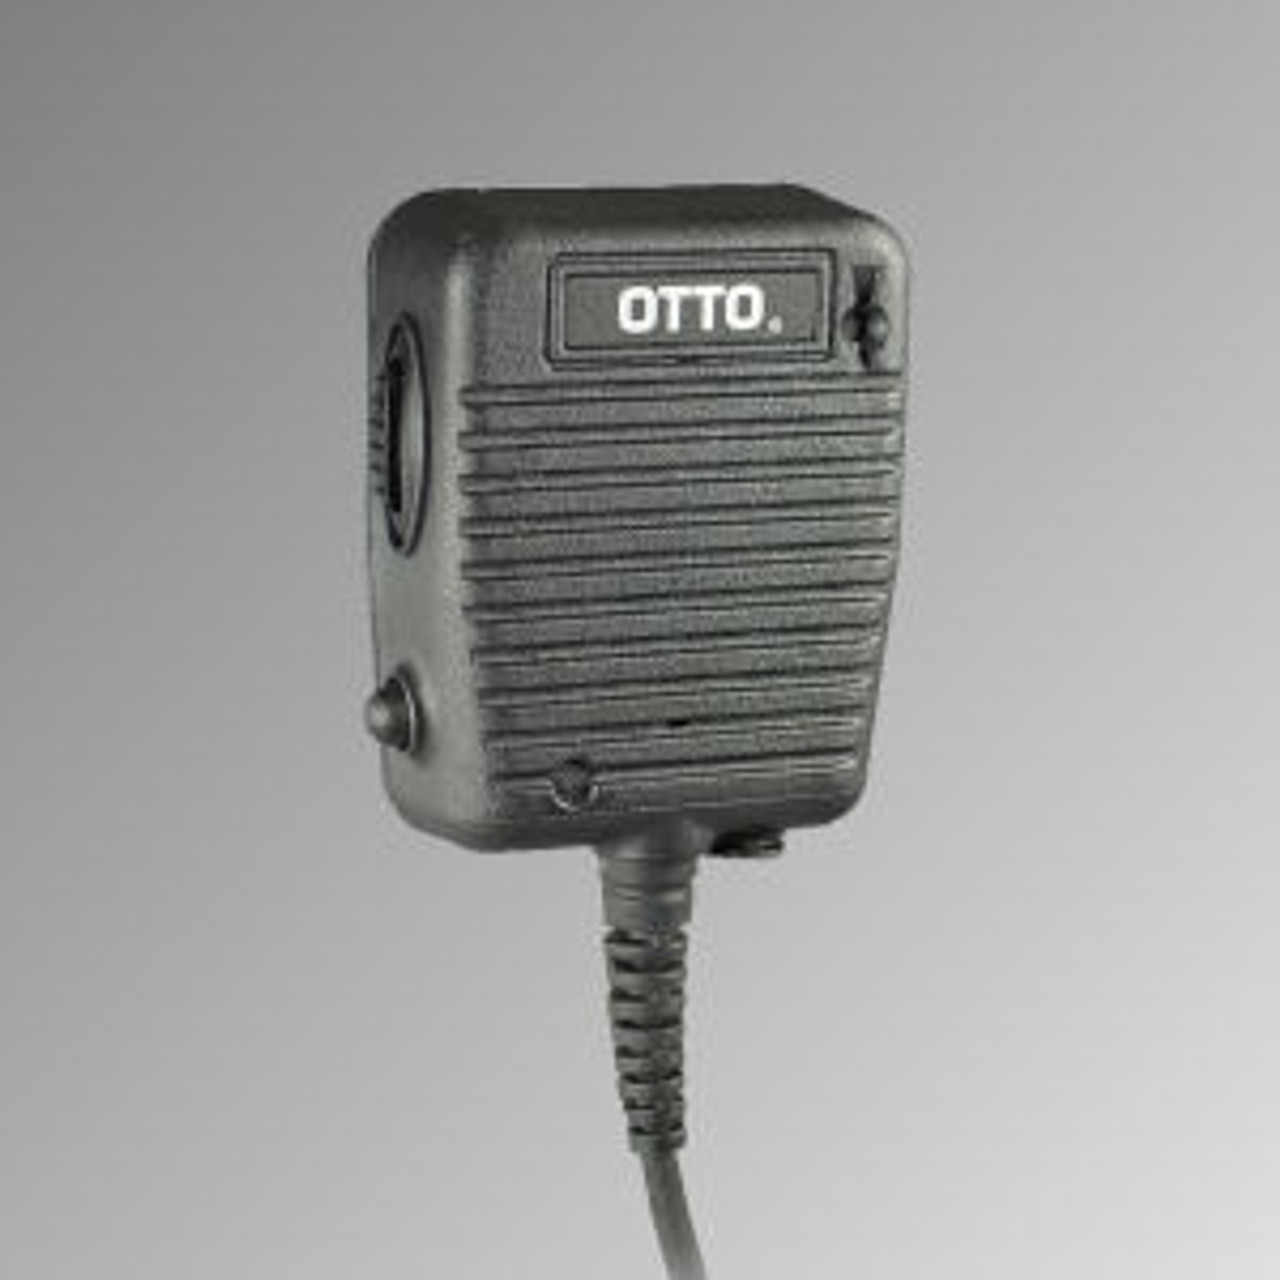 Otto Storm Mic For Harris P5450